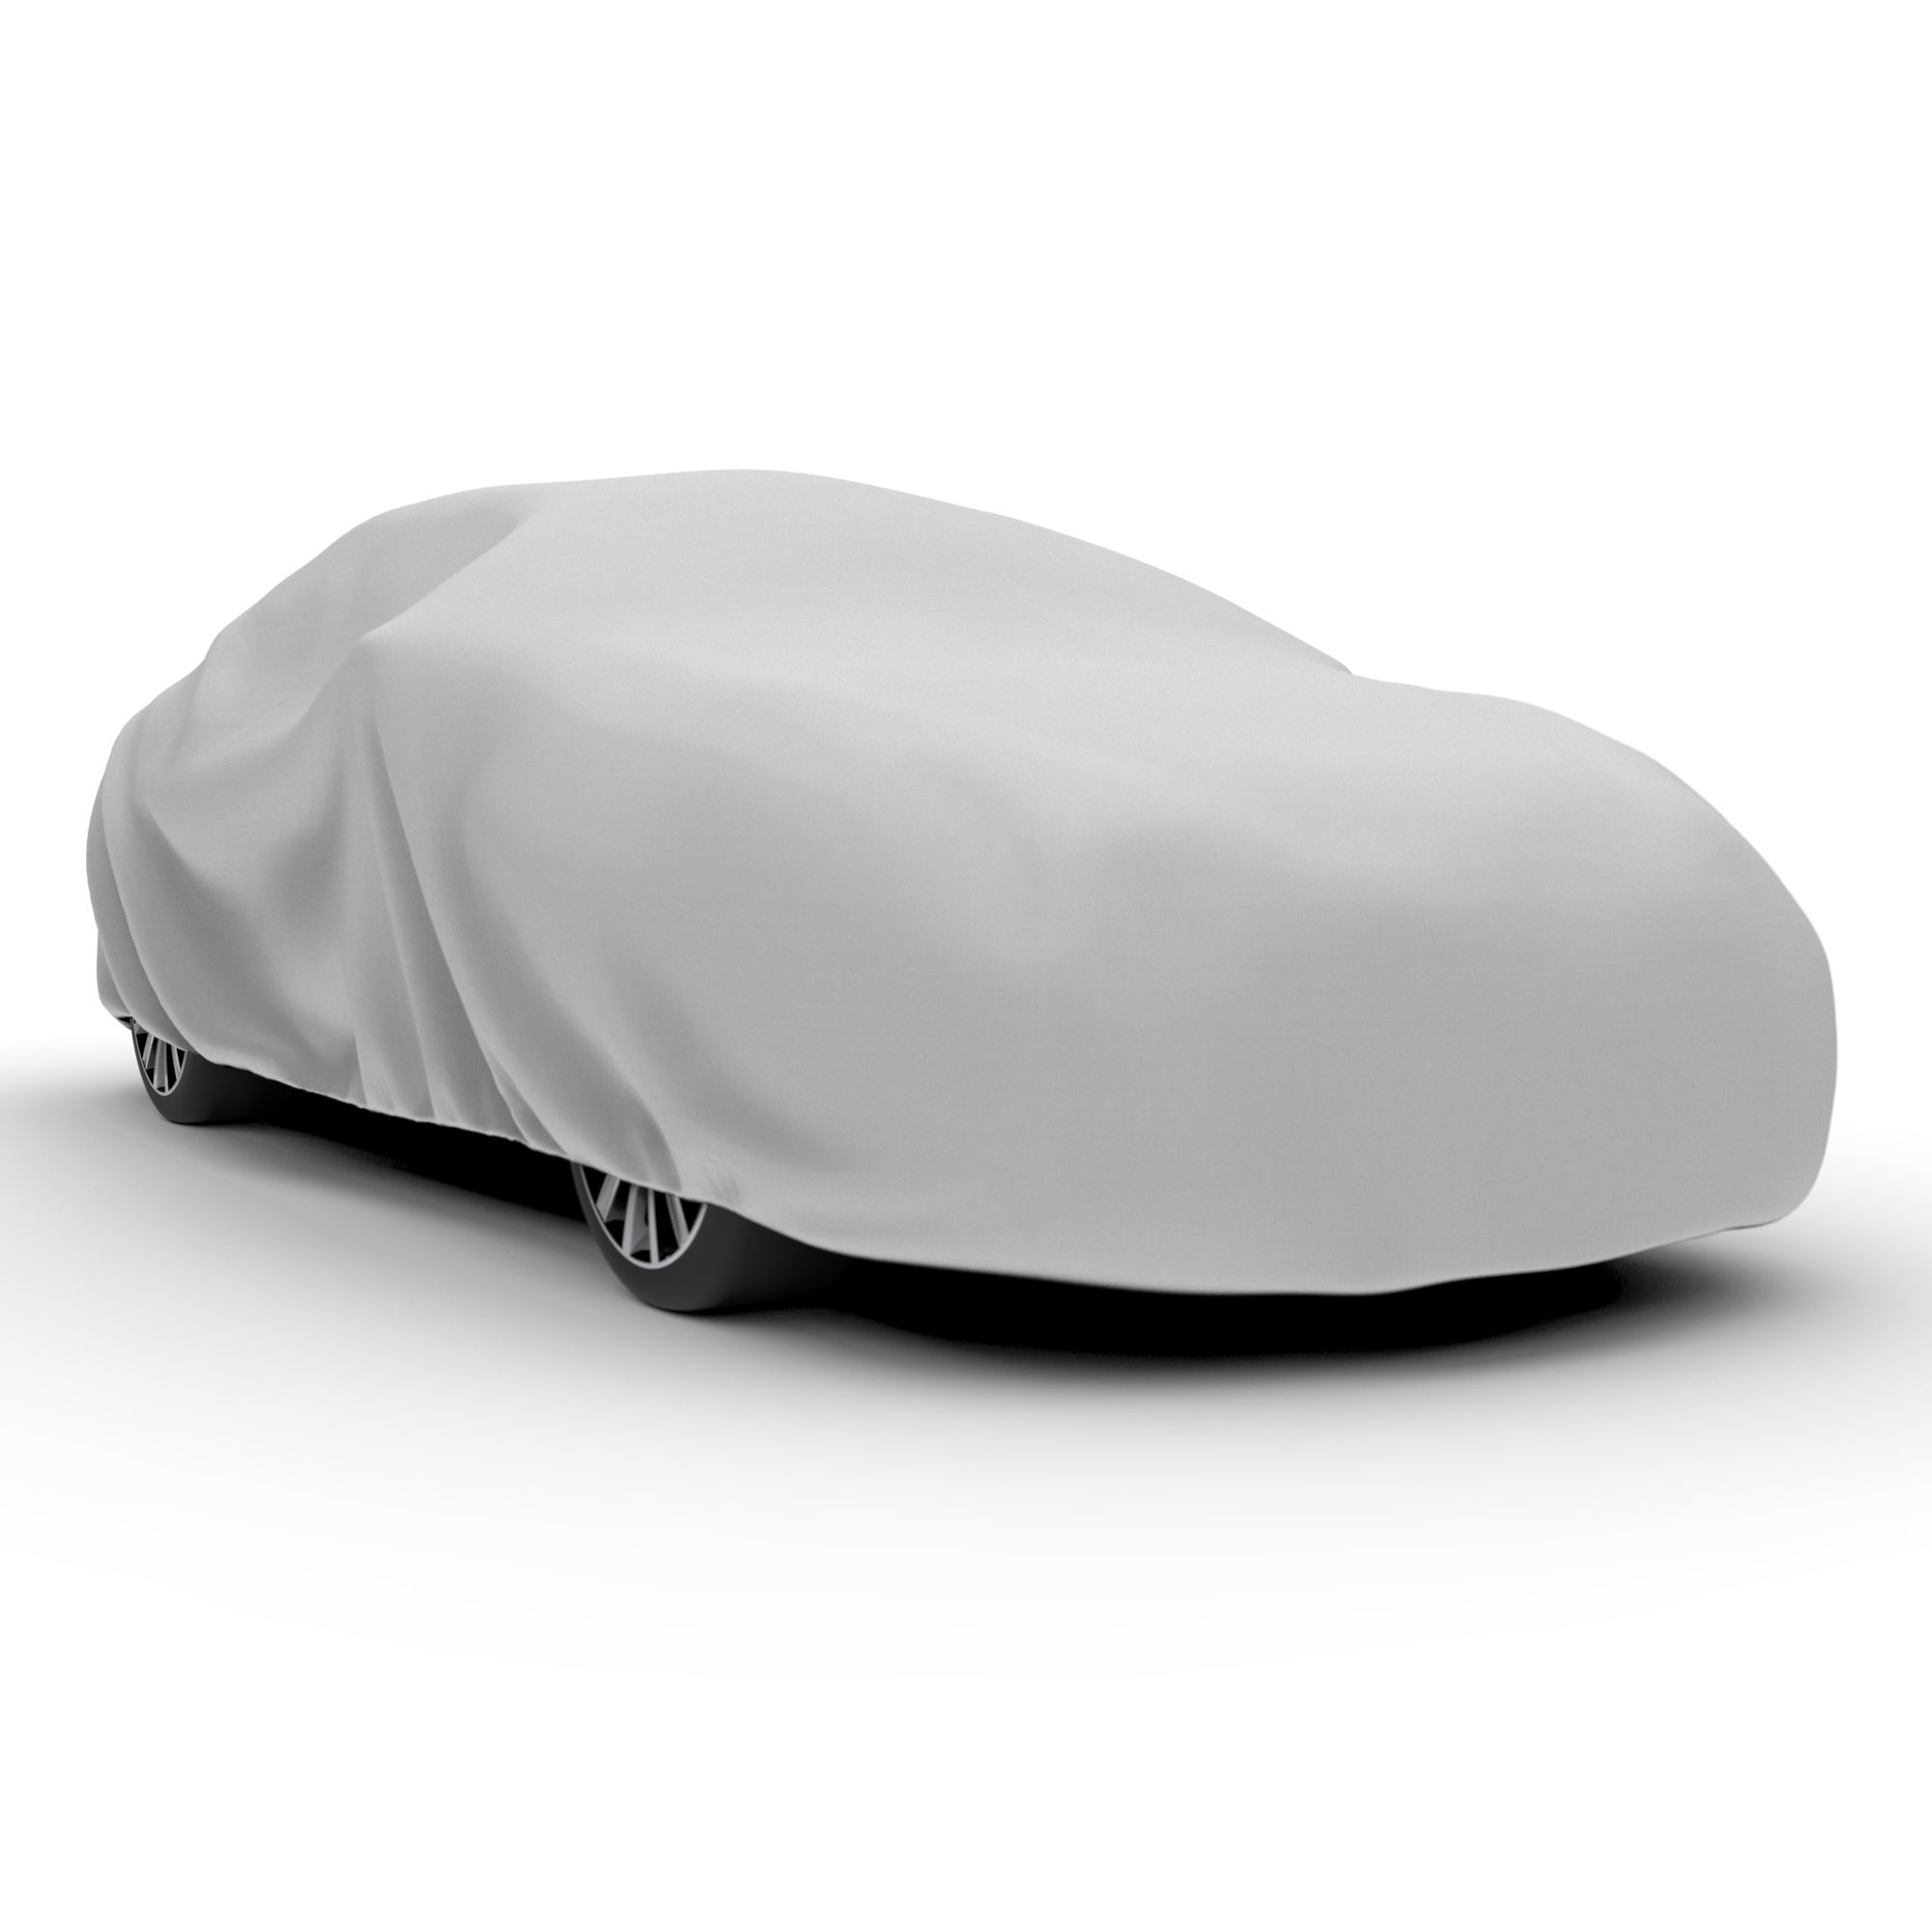 https://www.empirecovers.ca/images/thumbs/0009470_indoor-basic-car-cover.jpeg